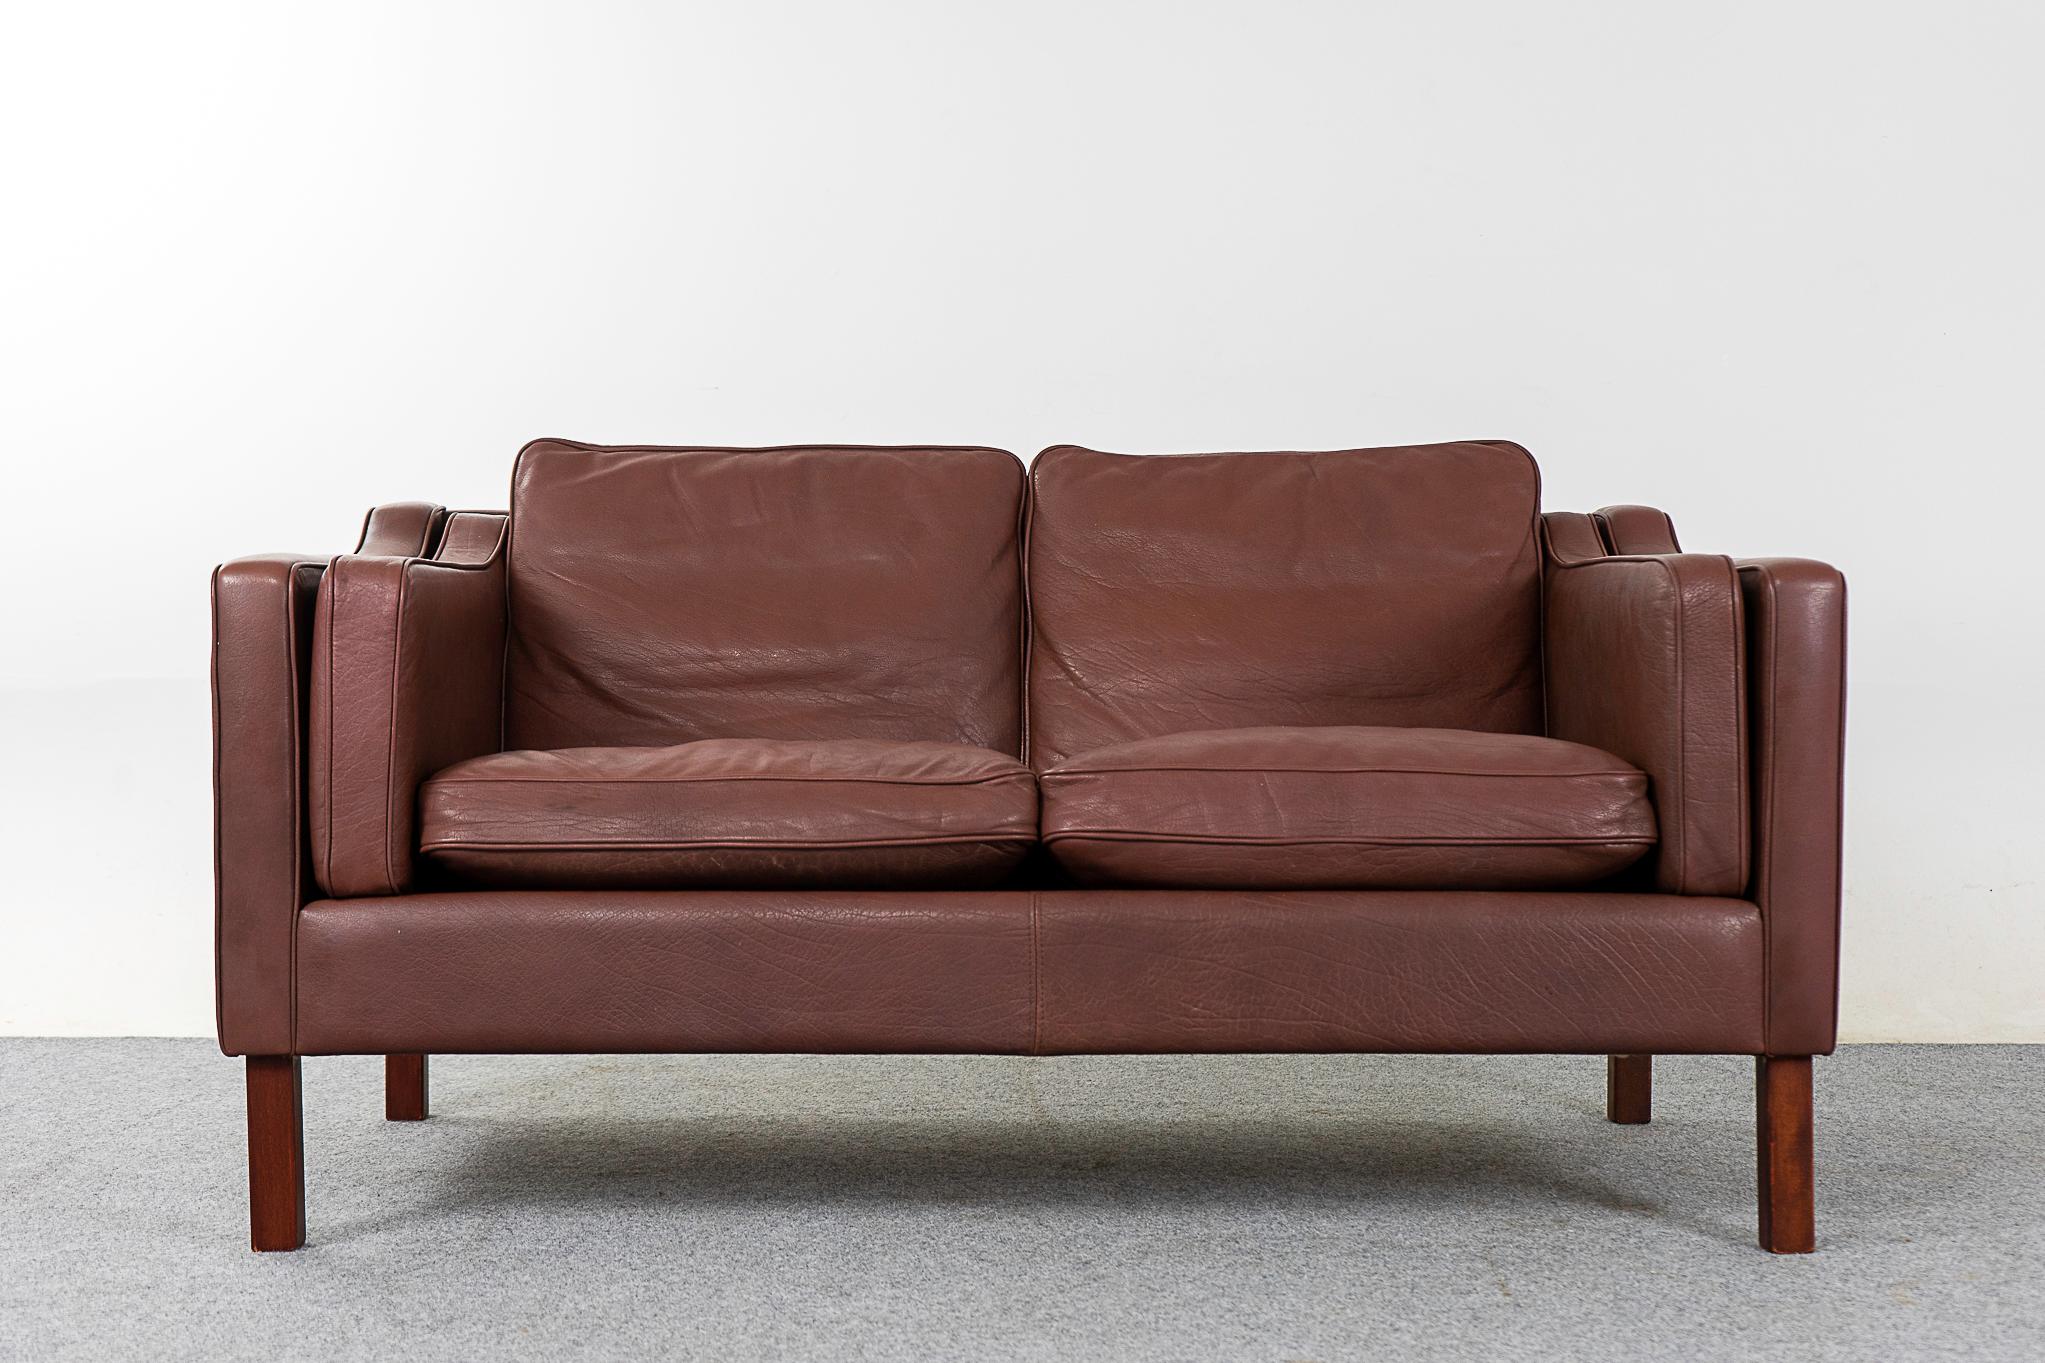 Leather mid-century loveseat, circa 1960's. Cozy, comfortable brown leather, classic modern design. Solid wood legs and compact footprint, some minor marks consistent with age.